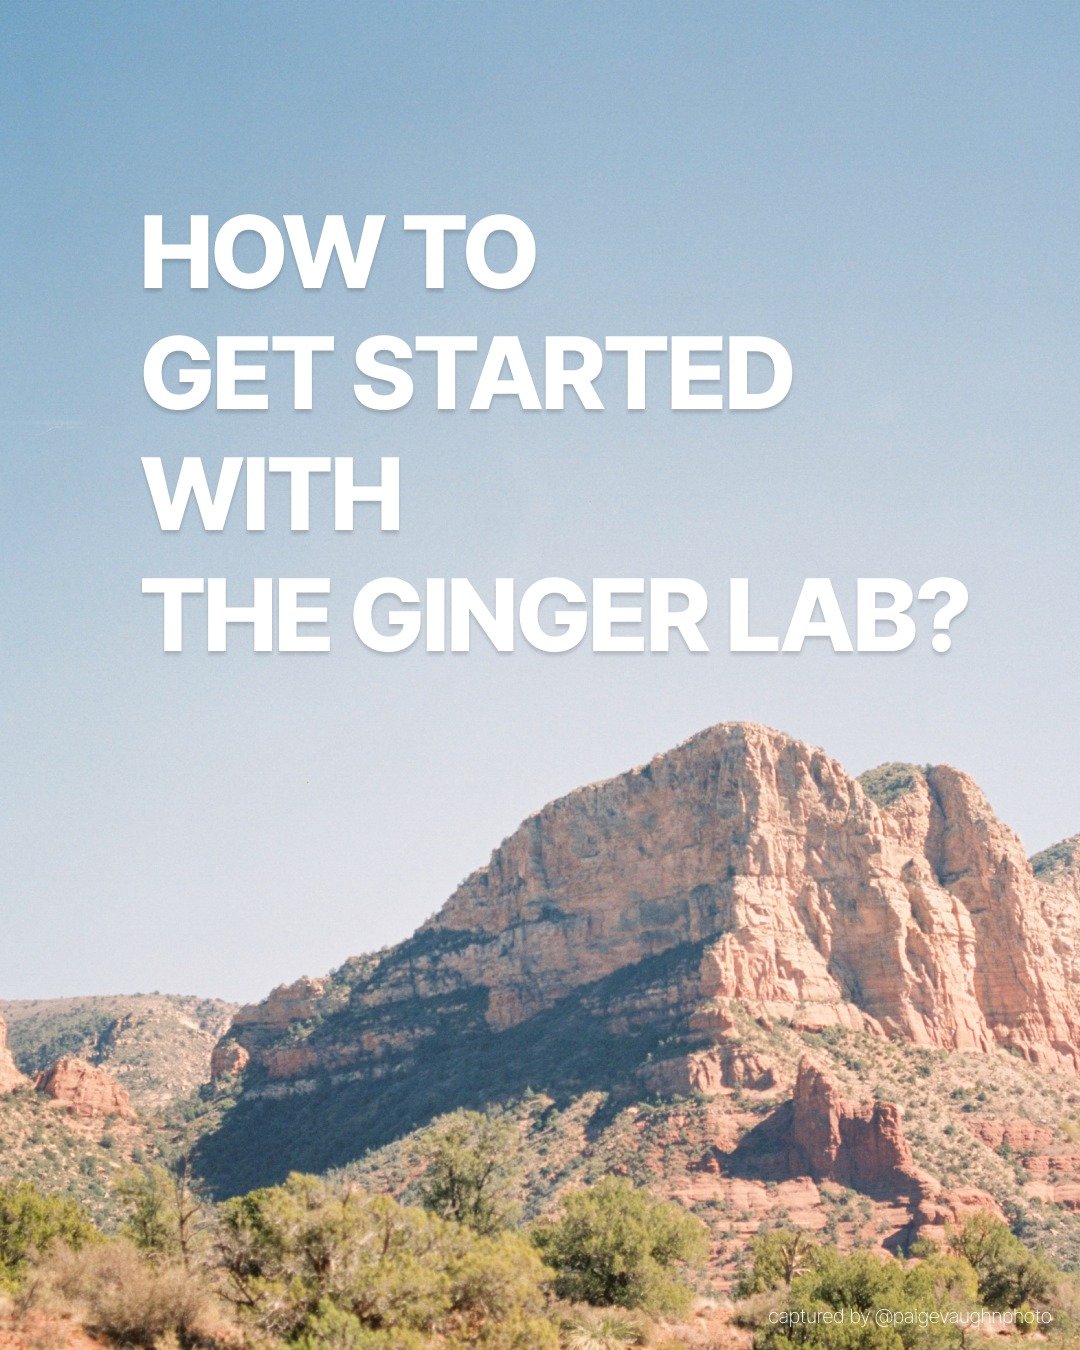 How do I get started with The Ginger Lab? 🤔

There are two ways to get started:

1. Dive right in! Send us your first order by following the detailed instructions ➡️ www.thegingerlab.com/send-photos. 

This option saves you a lot of time, and lets y